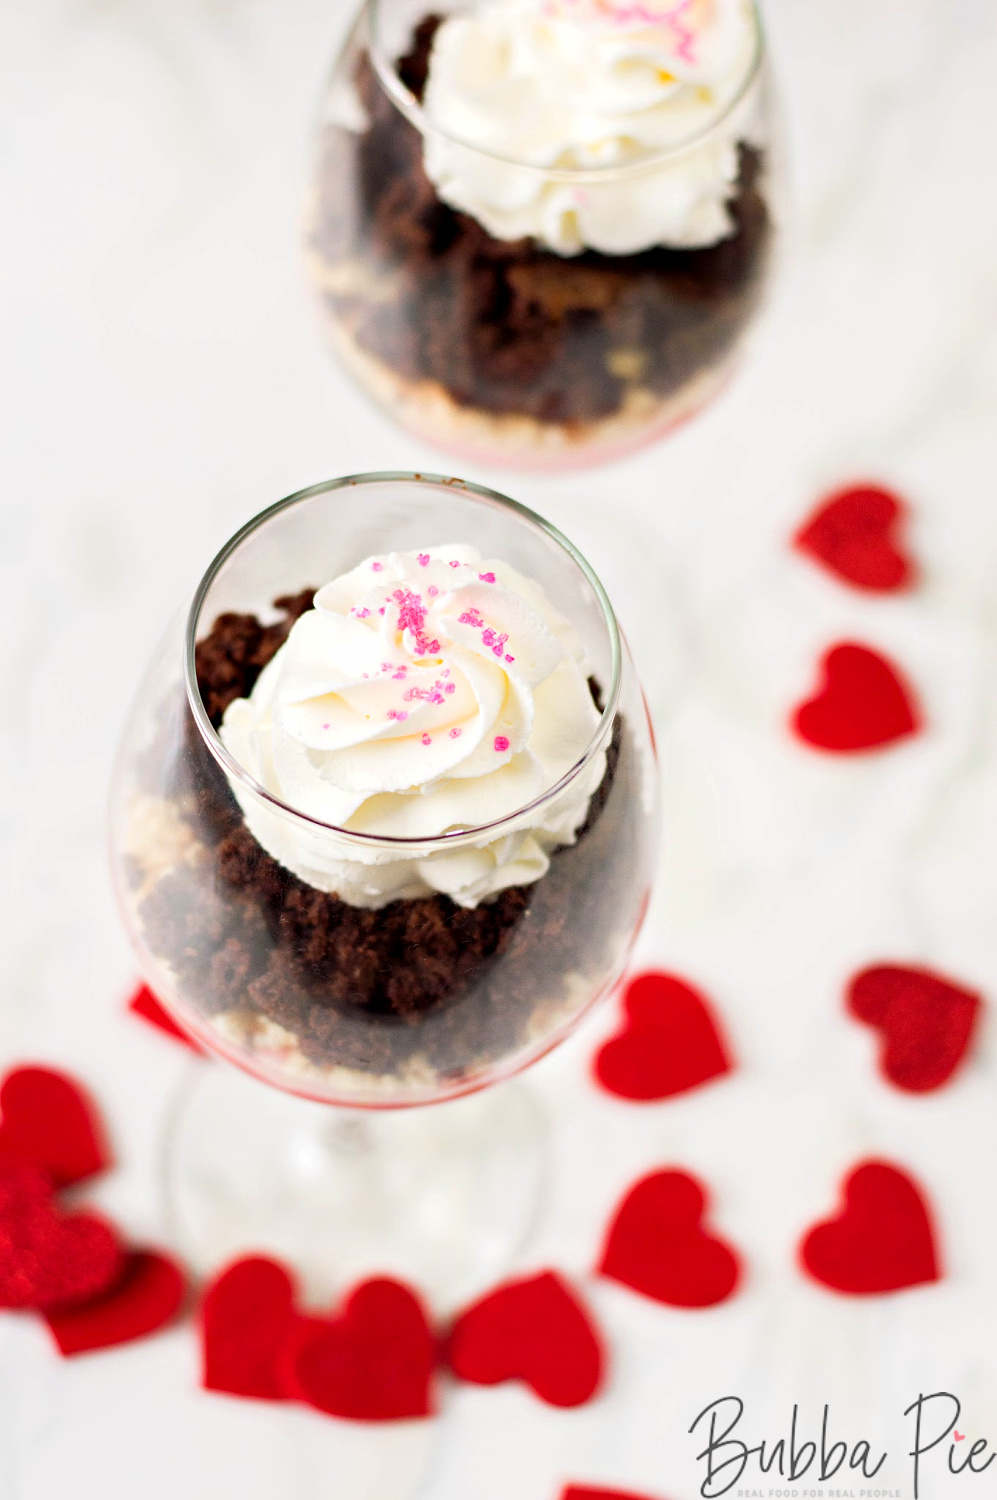 Valentine's Day Pudding Parfait Recipe ready to be served after a romantic dinner